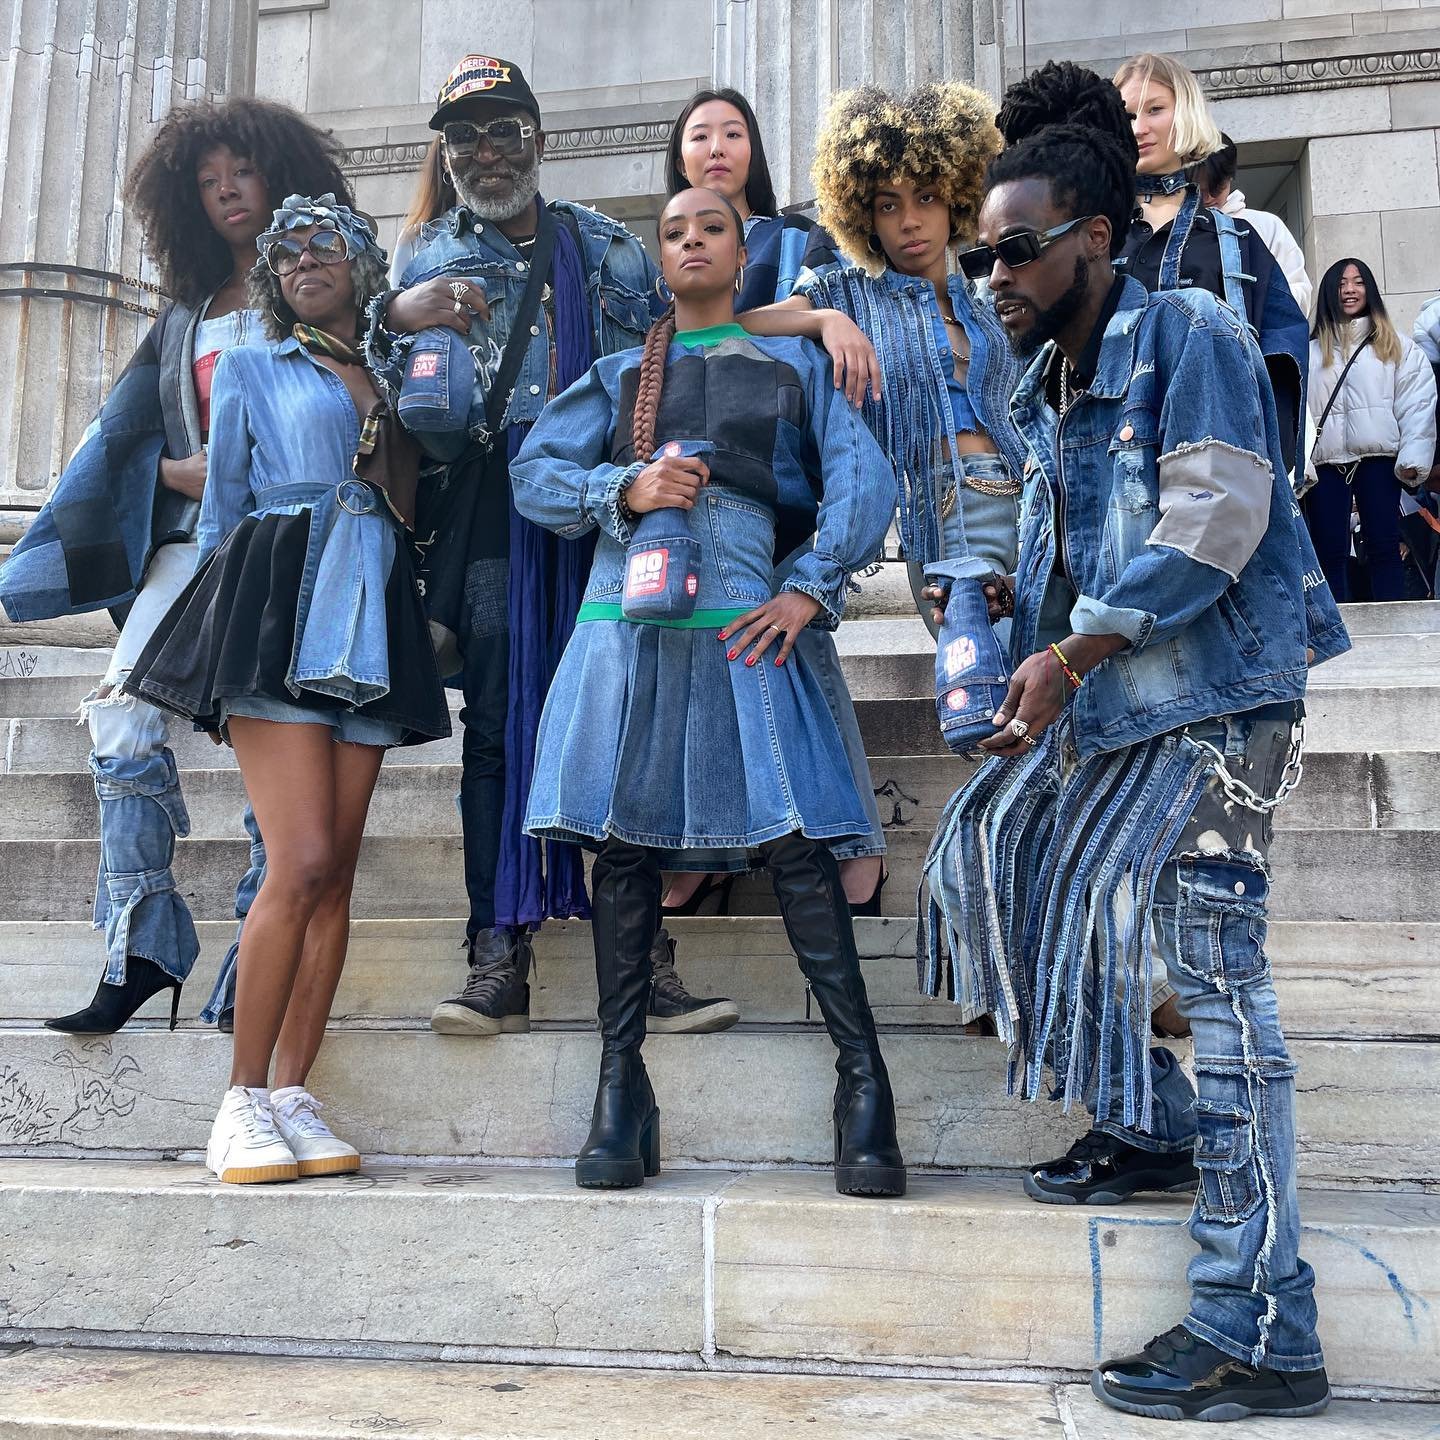 👖Denim Day Spray! Denim Walk, Brooklyn Bridge, April 24, 2024.👖❤️💪@peaceovrviolnce Denim Day 2024 Denim walk over the Brooklyn Bridge, starting at Borough Hall at about 11.30 am on Wednesday April 24. The campaign began after a ruling by the Itali